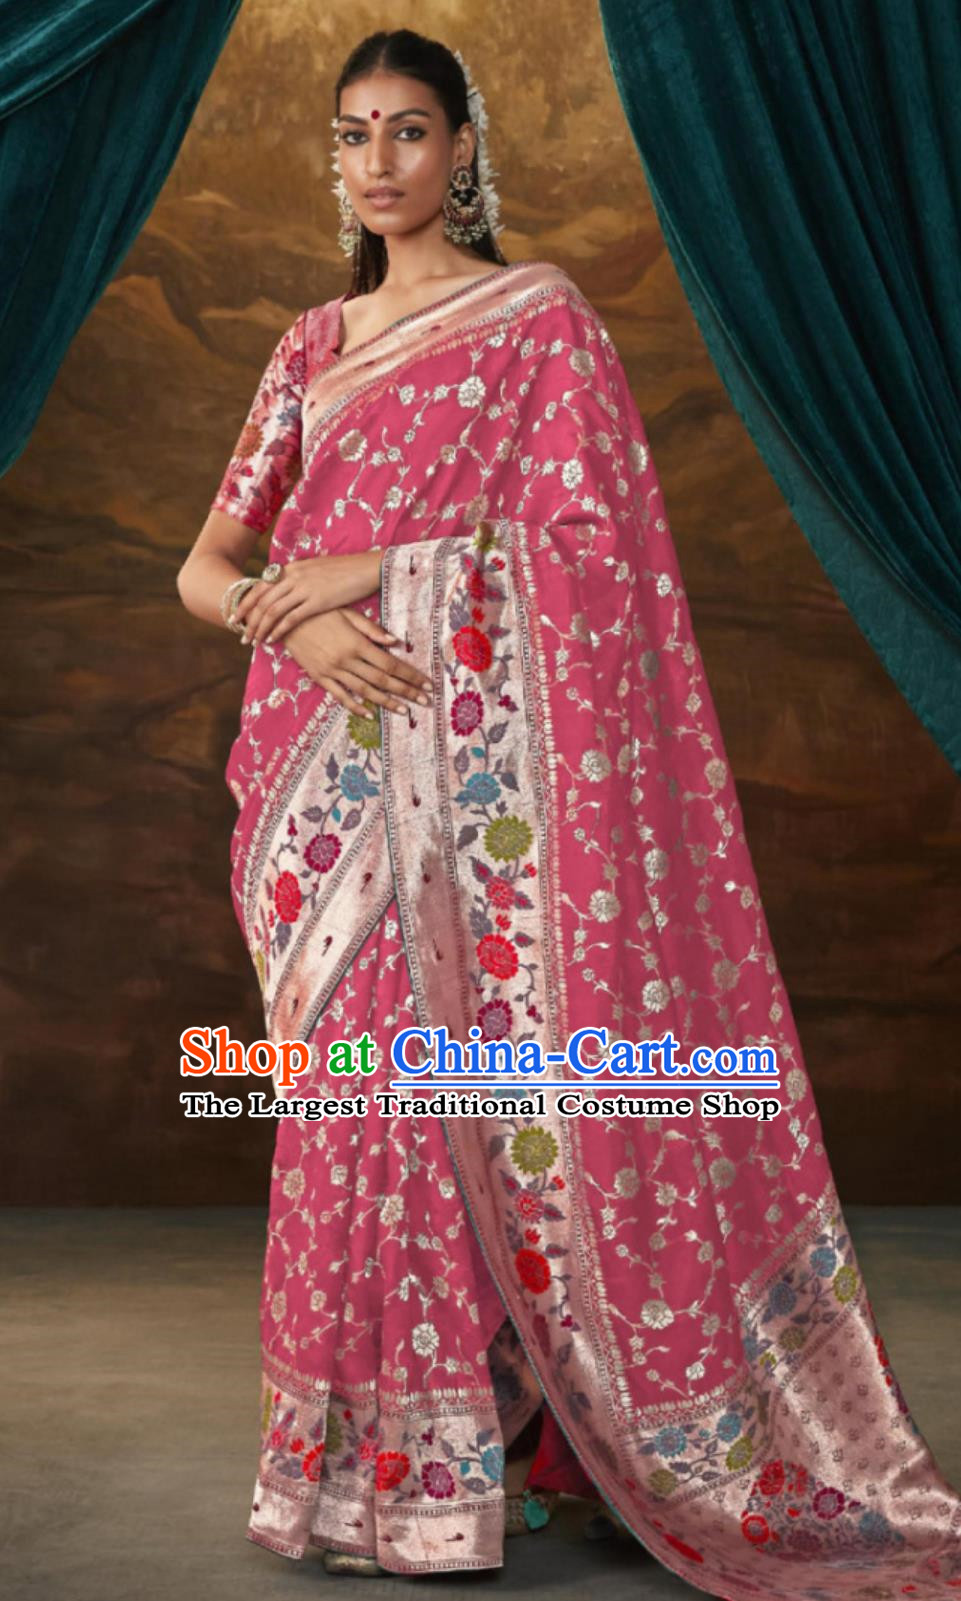 Traditional Festival Noble Lady Rosy Sari Dress Indian Brahmans Woman Costume India National Clothing